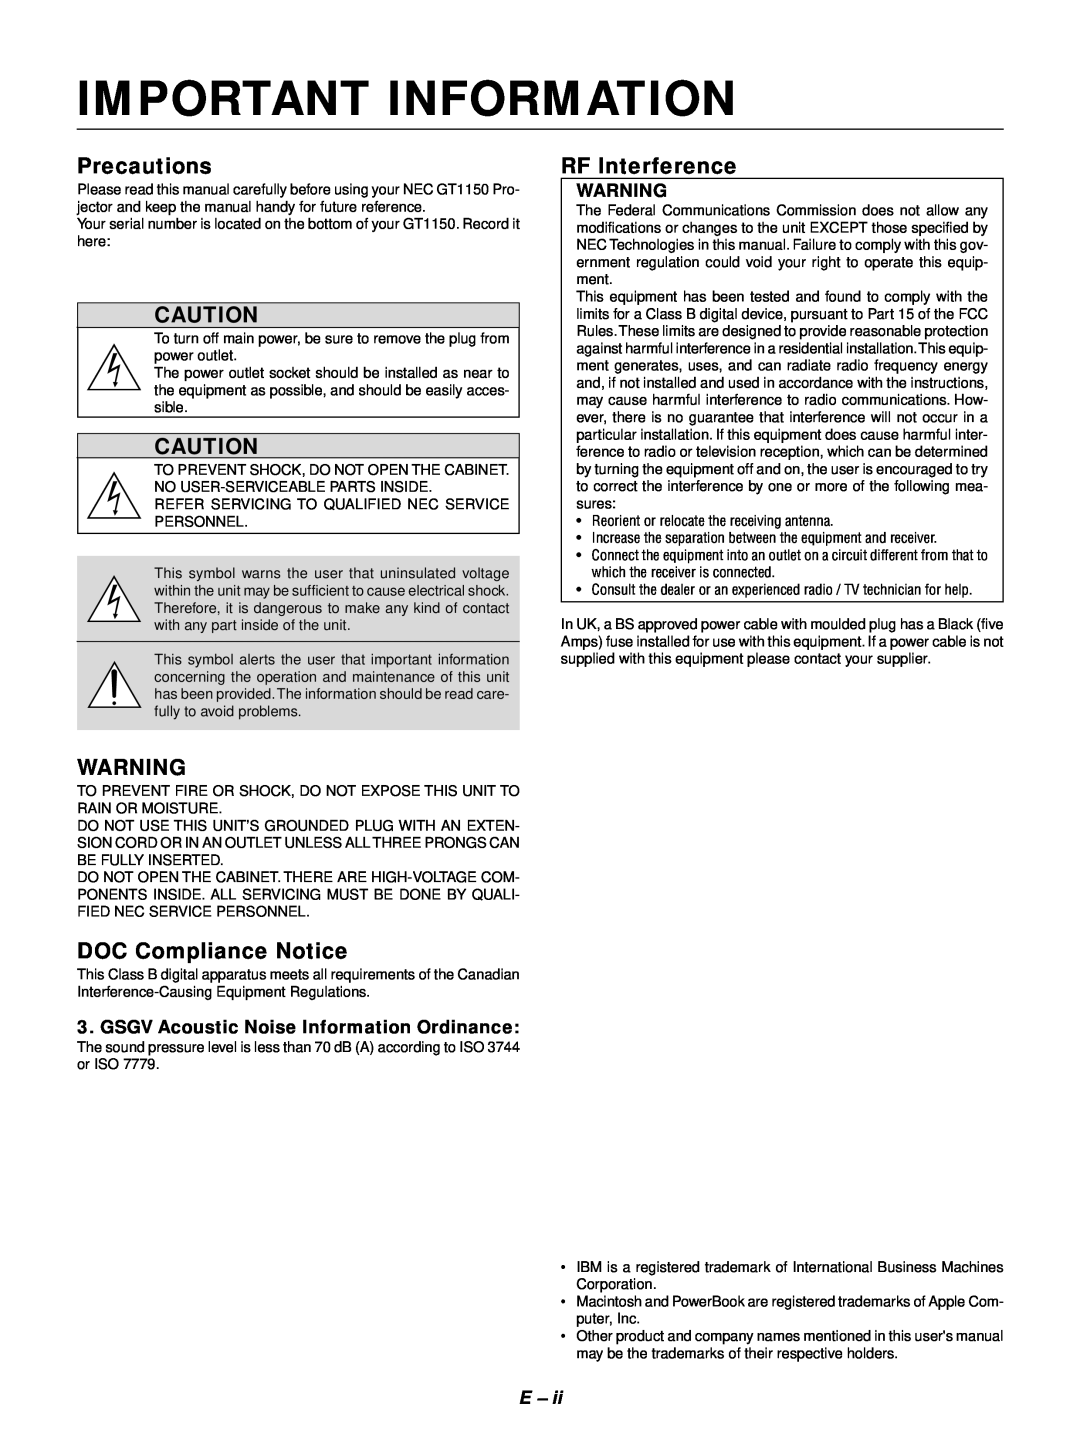 NEC GT1150 user manual Important Information, Precautions, RF Interference, DOC Compliance Notice 